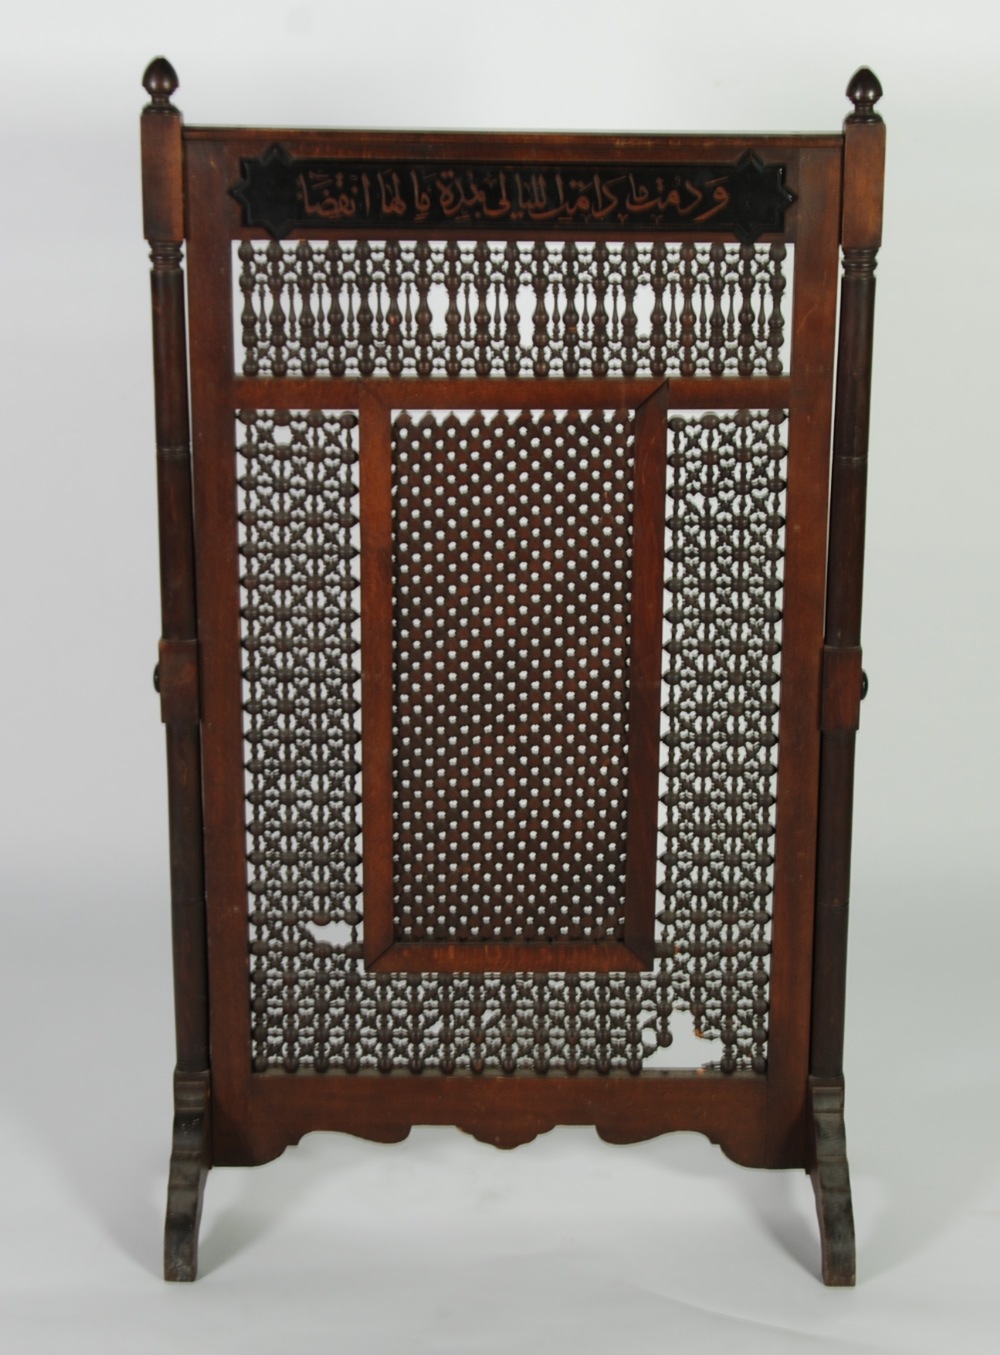 EARLY 20th CENTURY ANGLO INDIAN TURNED AND STAINED BEECH FIRESCREEN, the top rail applied with a